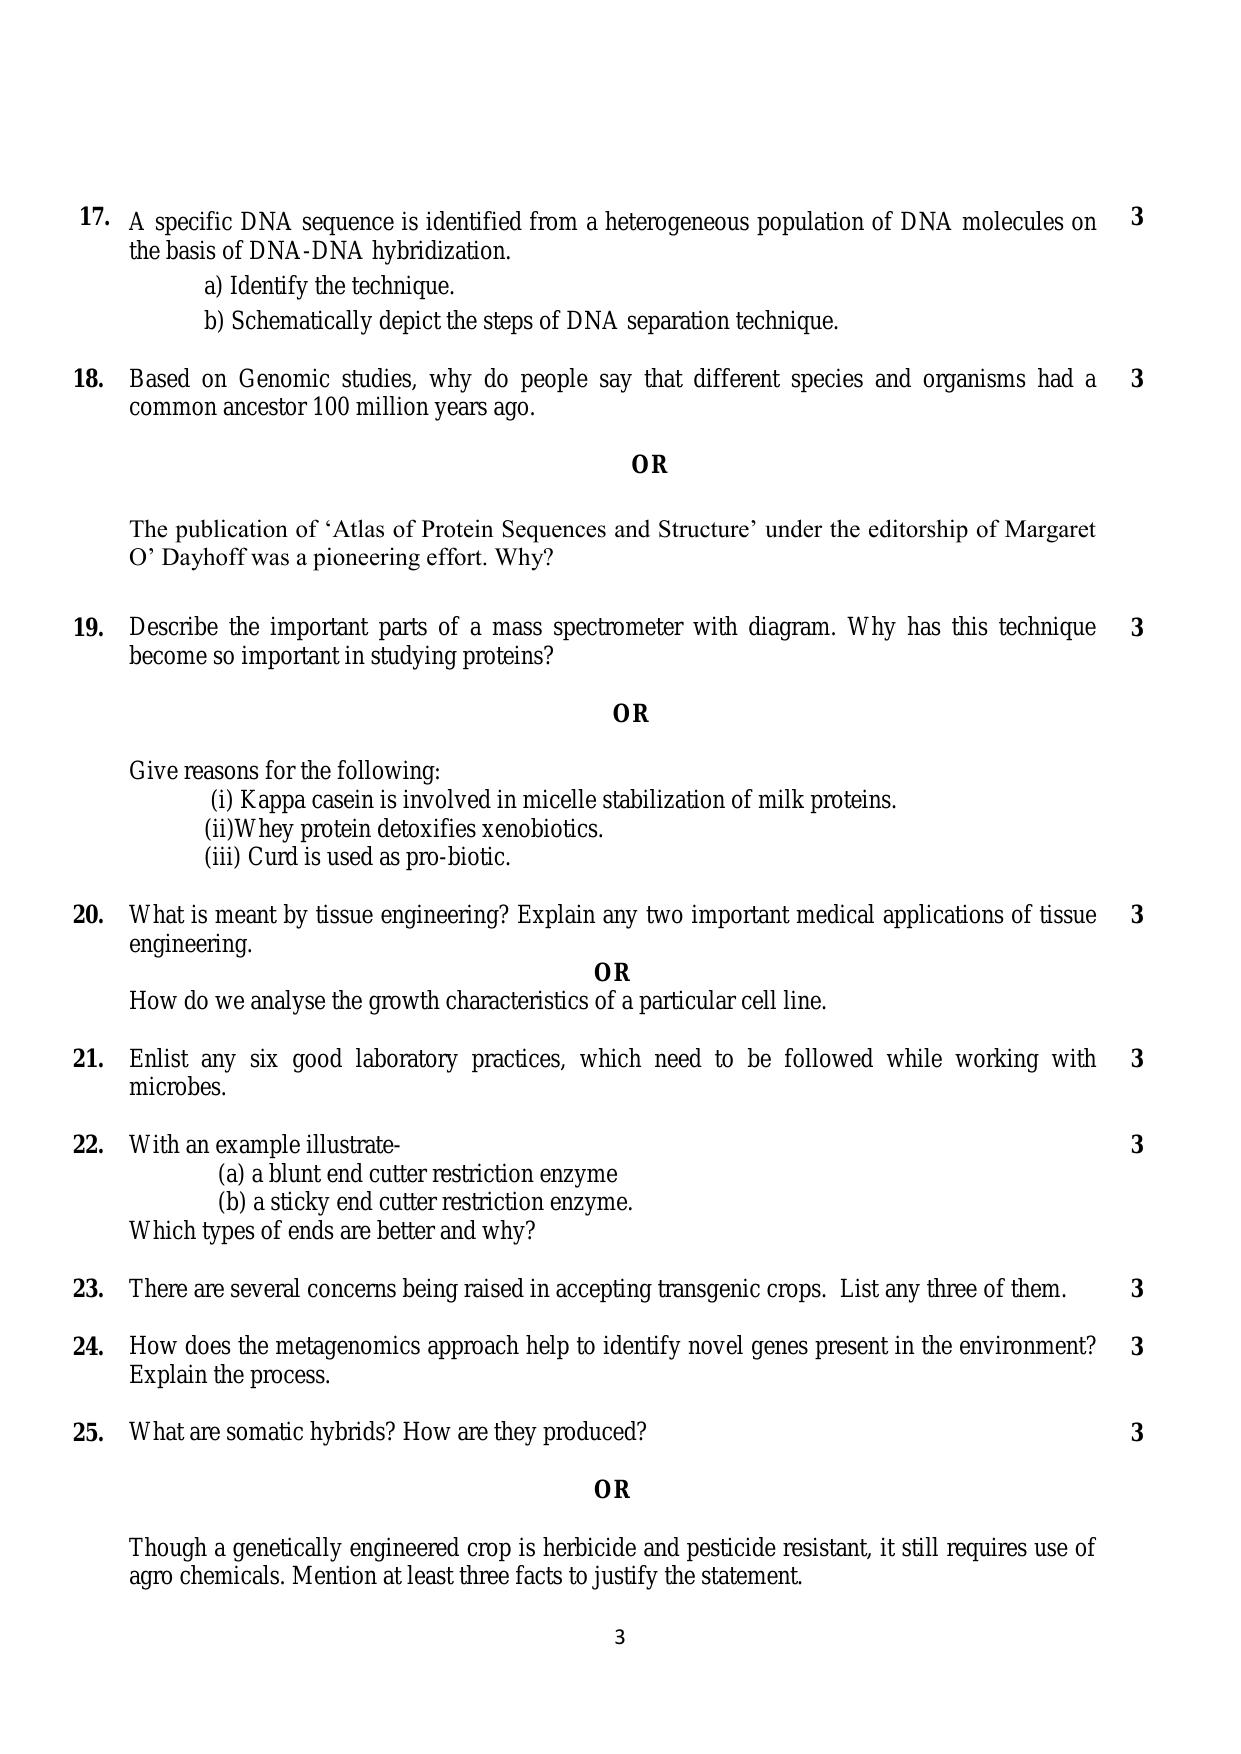 CBSE Class 12 Biotechnology-Sample Paper 2018-19 - Page 3